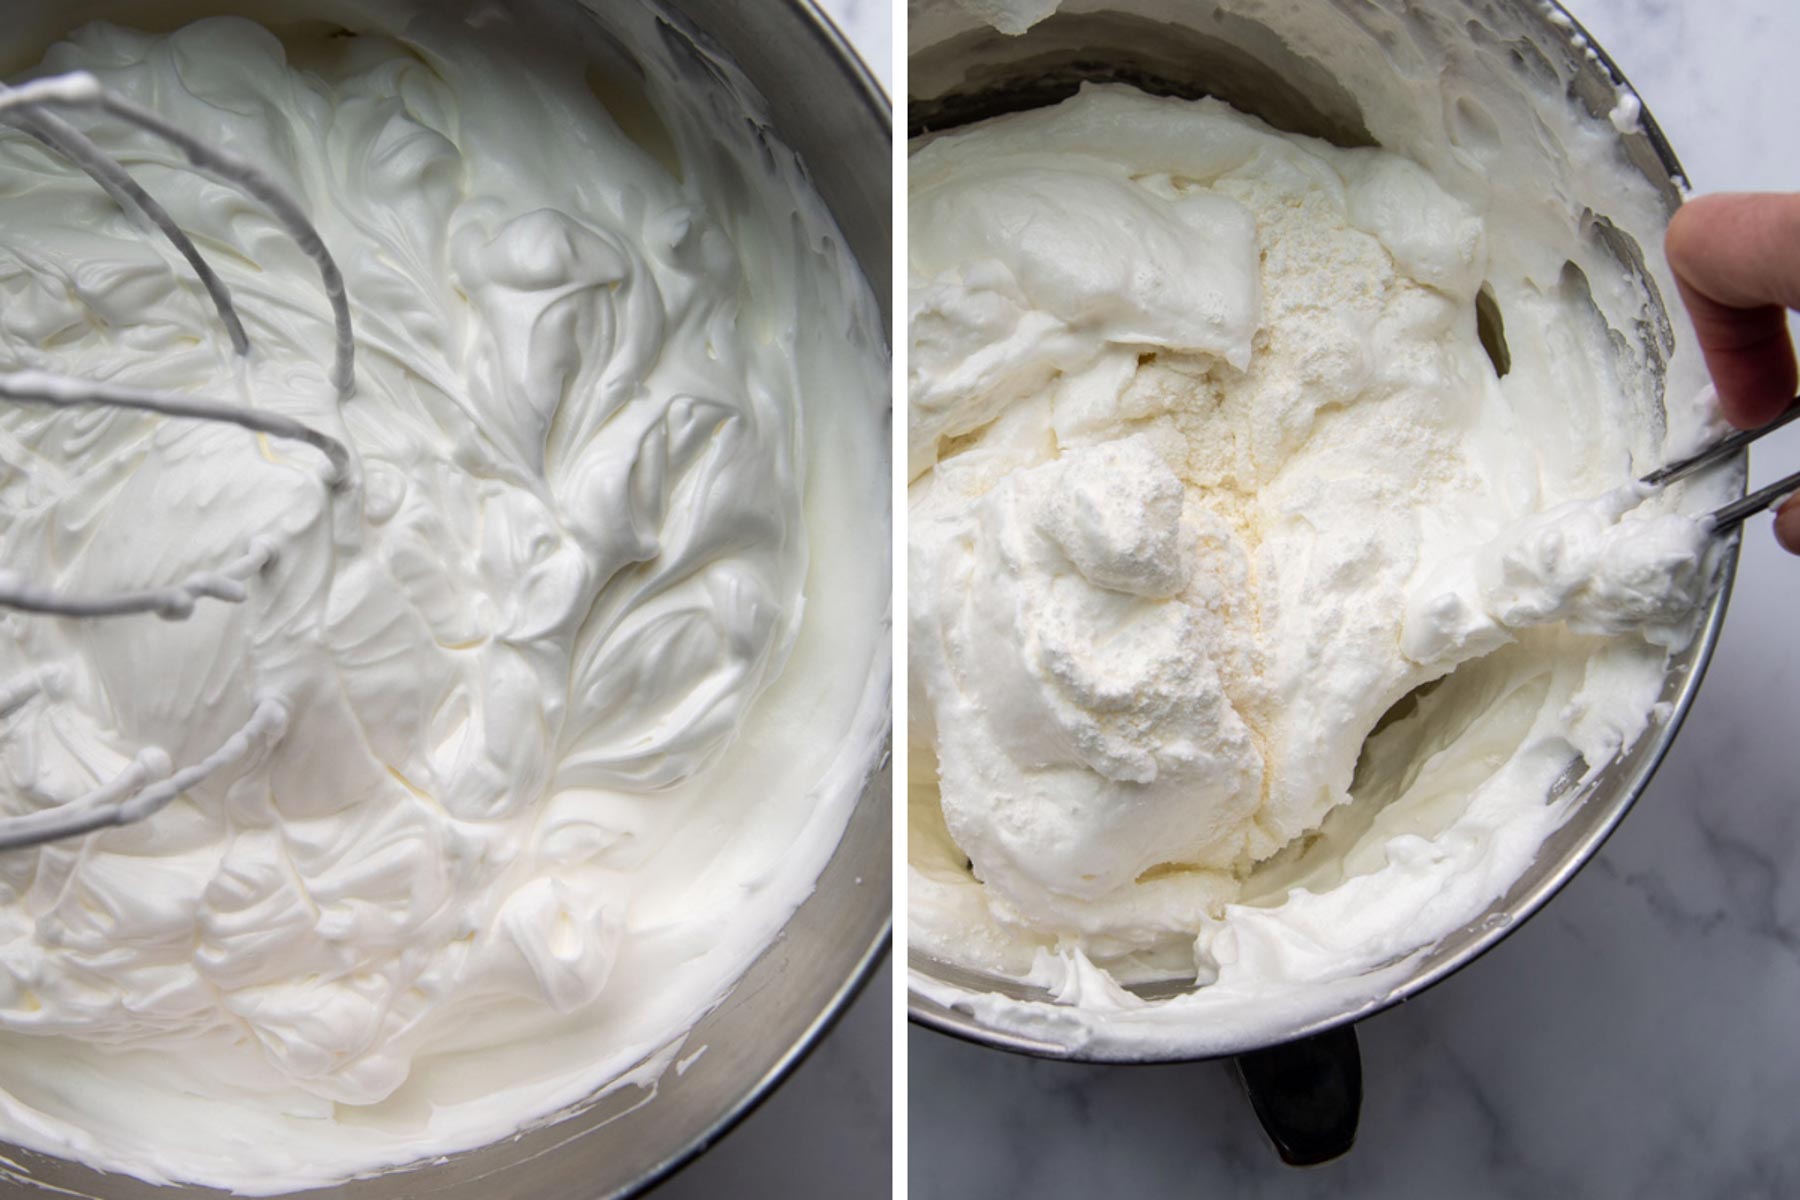 more images showing how to make angel food cake that is gluten free.